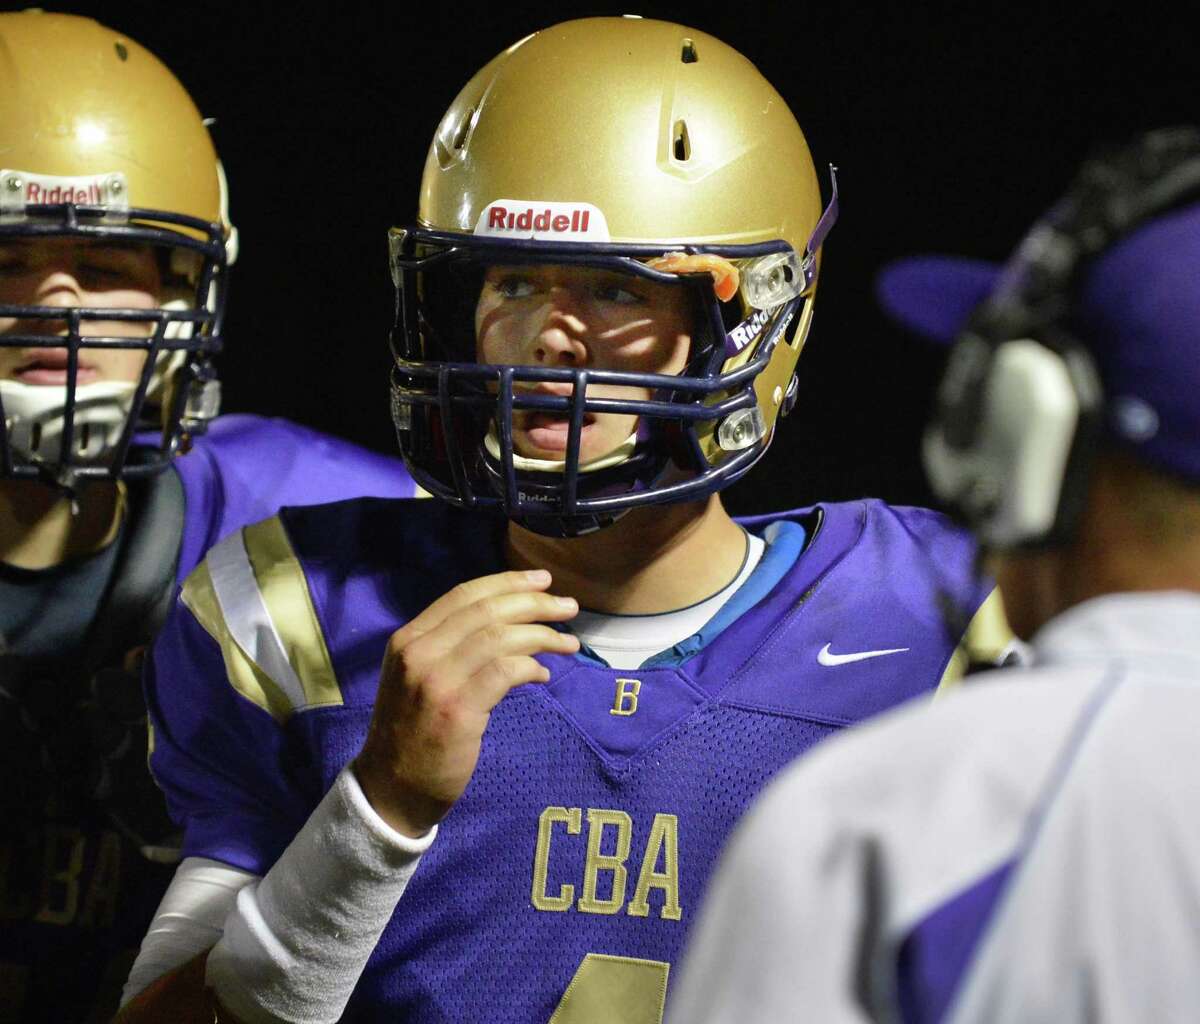 CBA quarterback Troy Anthony during Friday night's game against La Salle at CBA in Colonie Friday Sept. 14, 2012. (John Carl D'Annibale / Times Union)